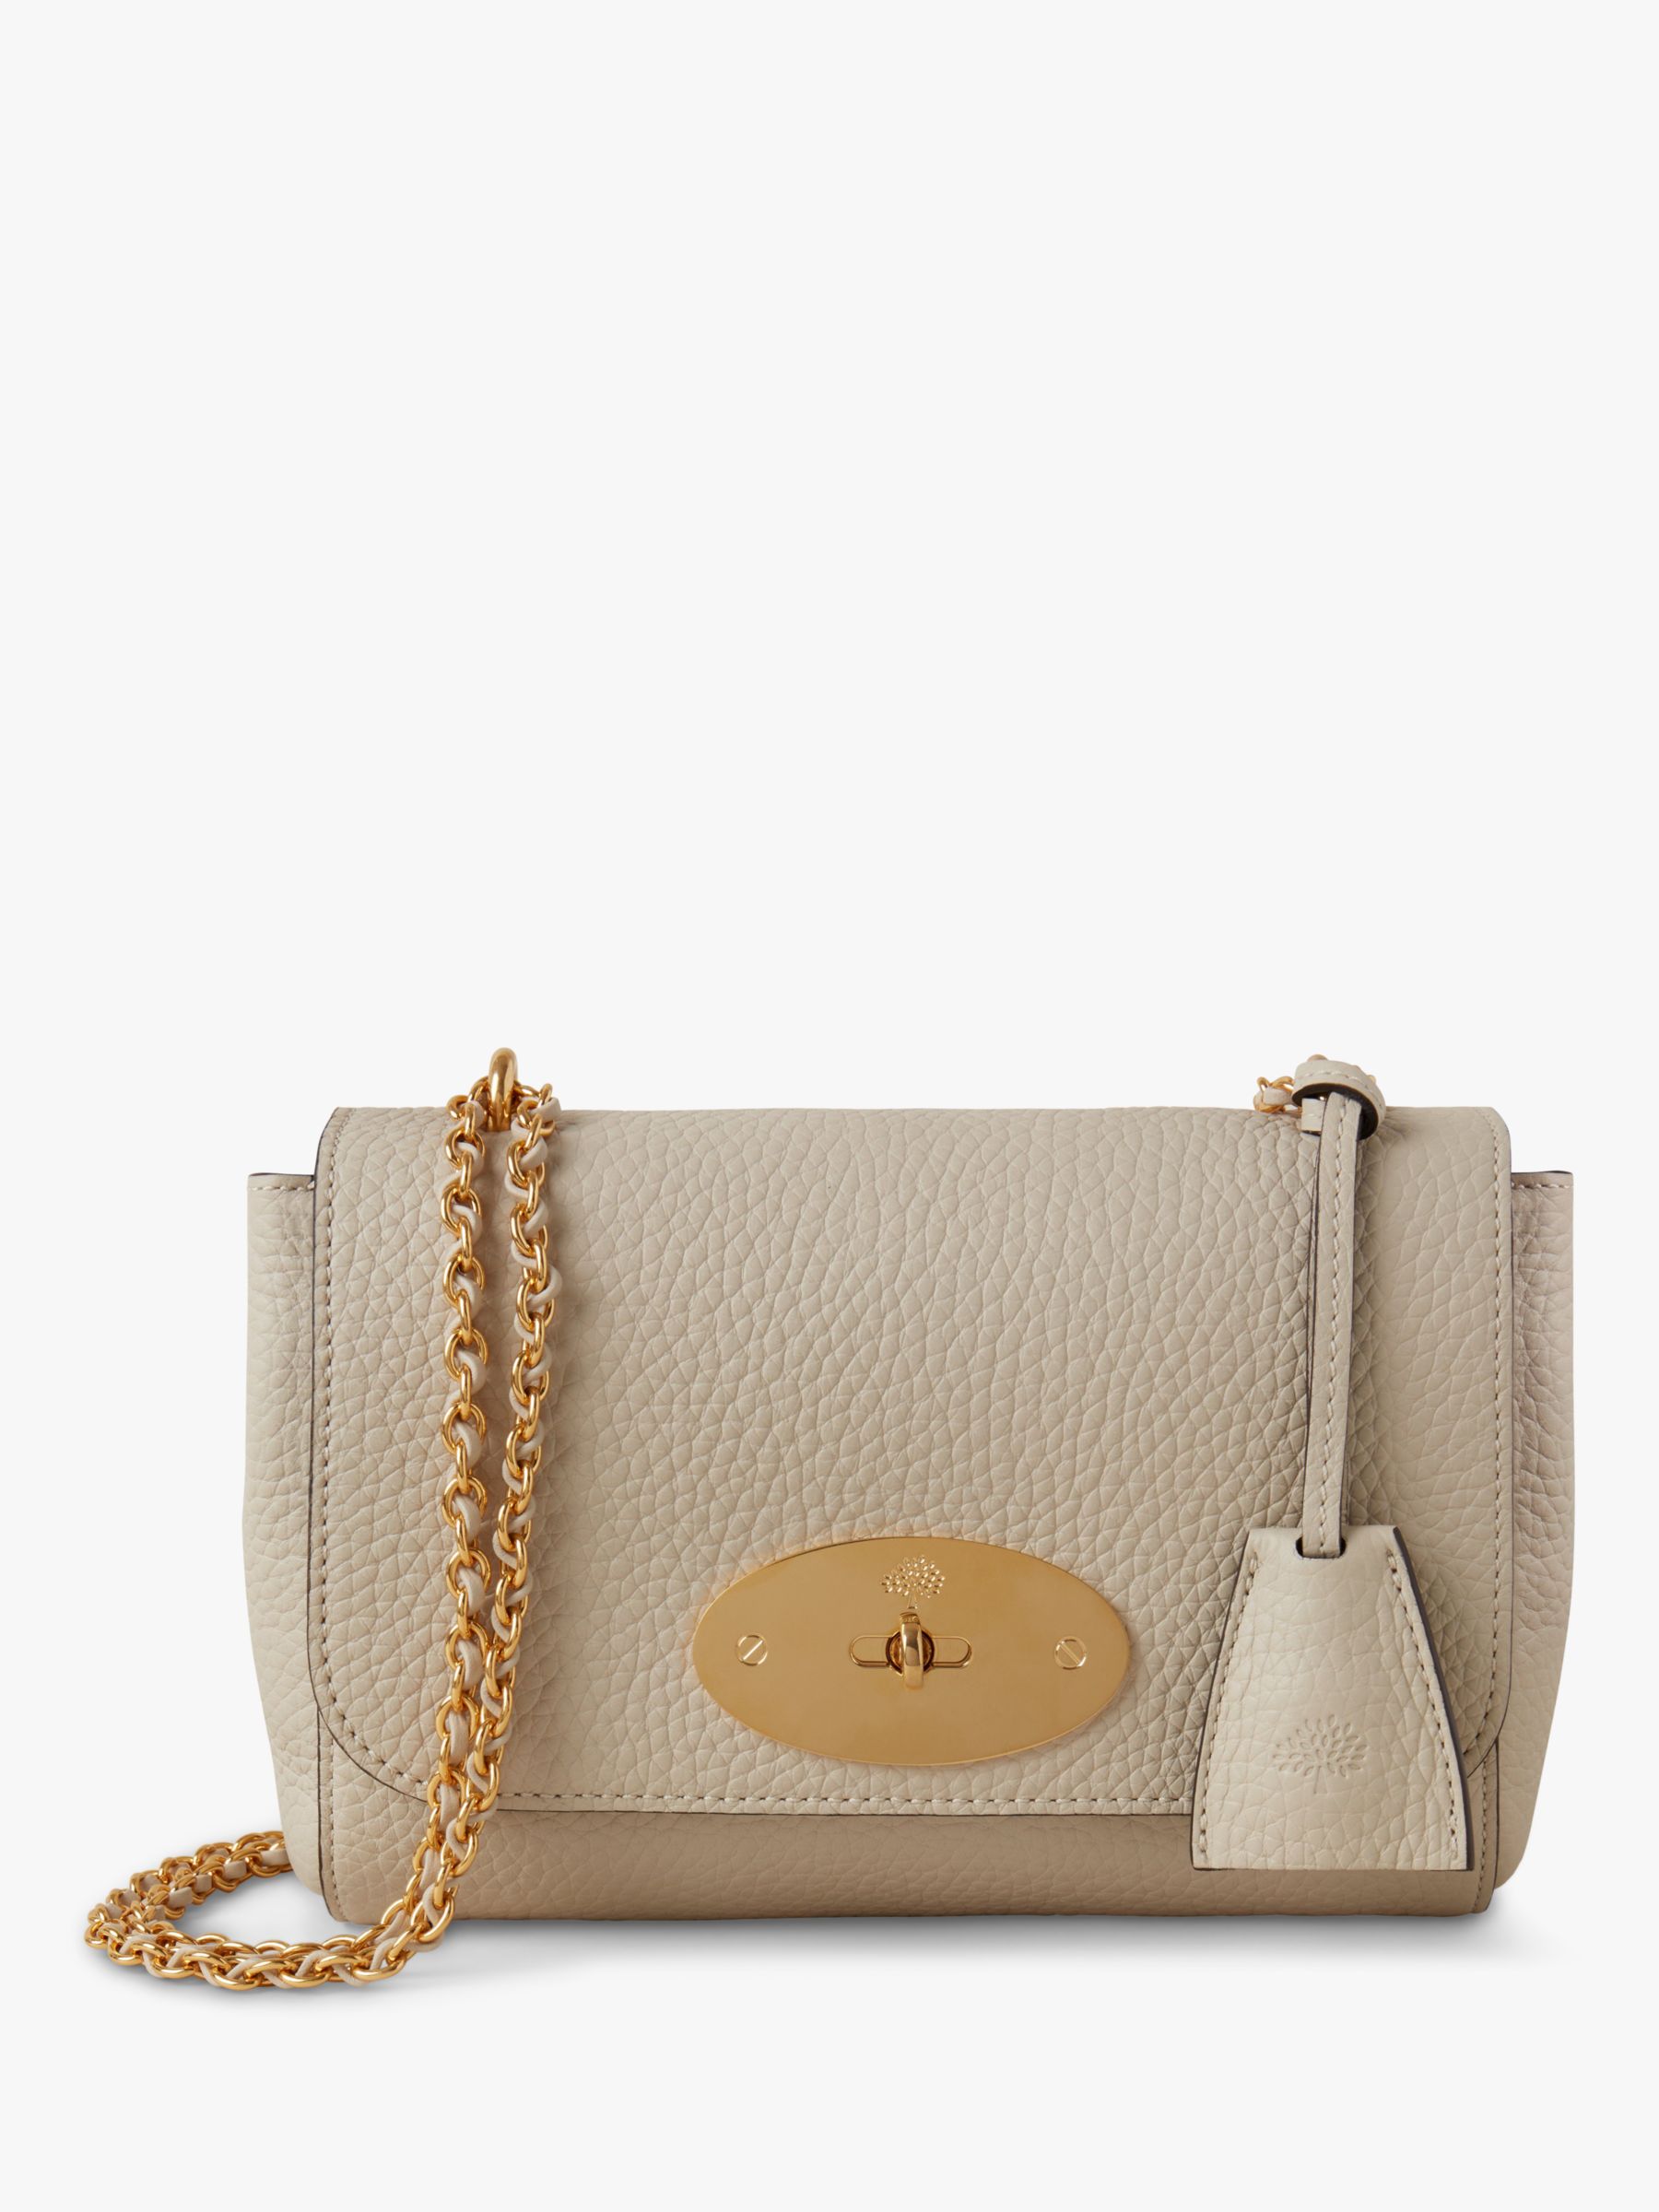 Mulberry Lily Heavy Grain Leather Shoulder Bag, Chalk at John Lewis ...